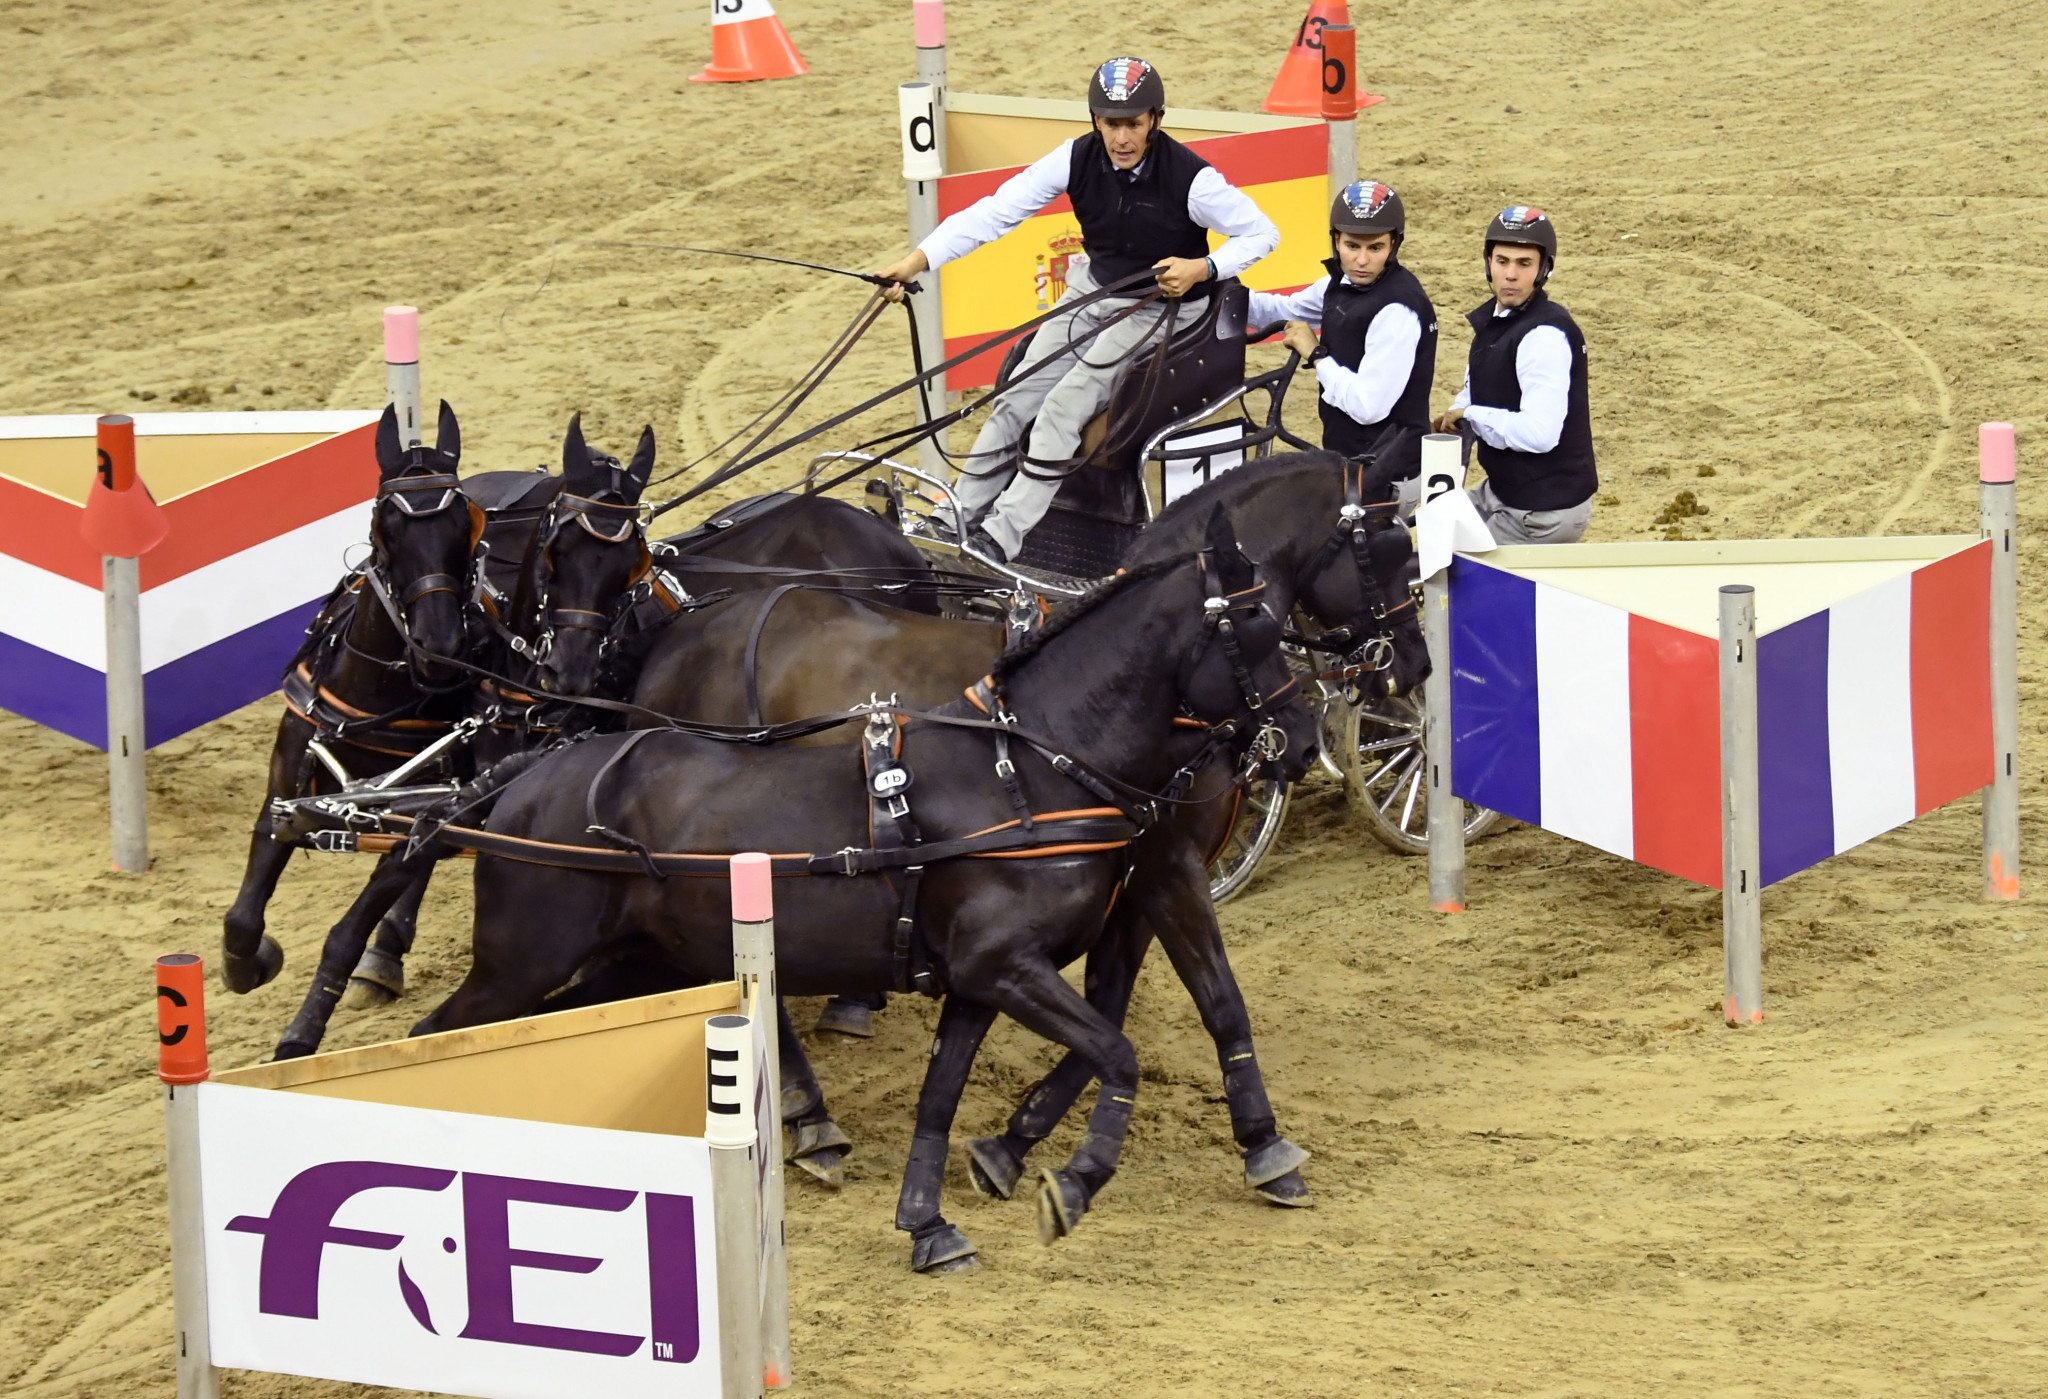 Basel, Bordeaux and Fort Worth confirmed as future hosts of FEI World Cups